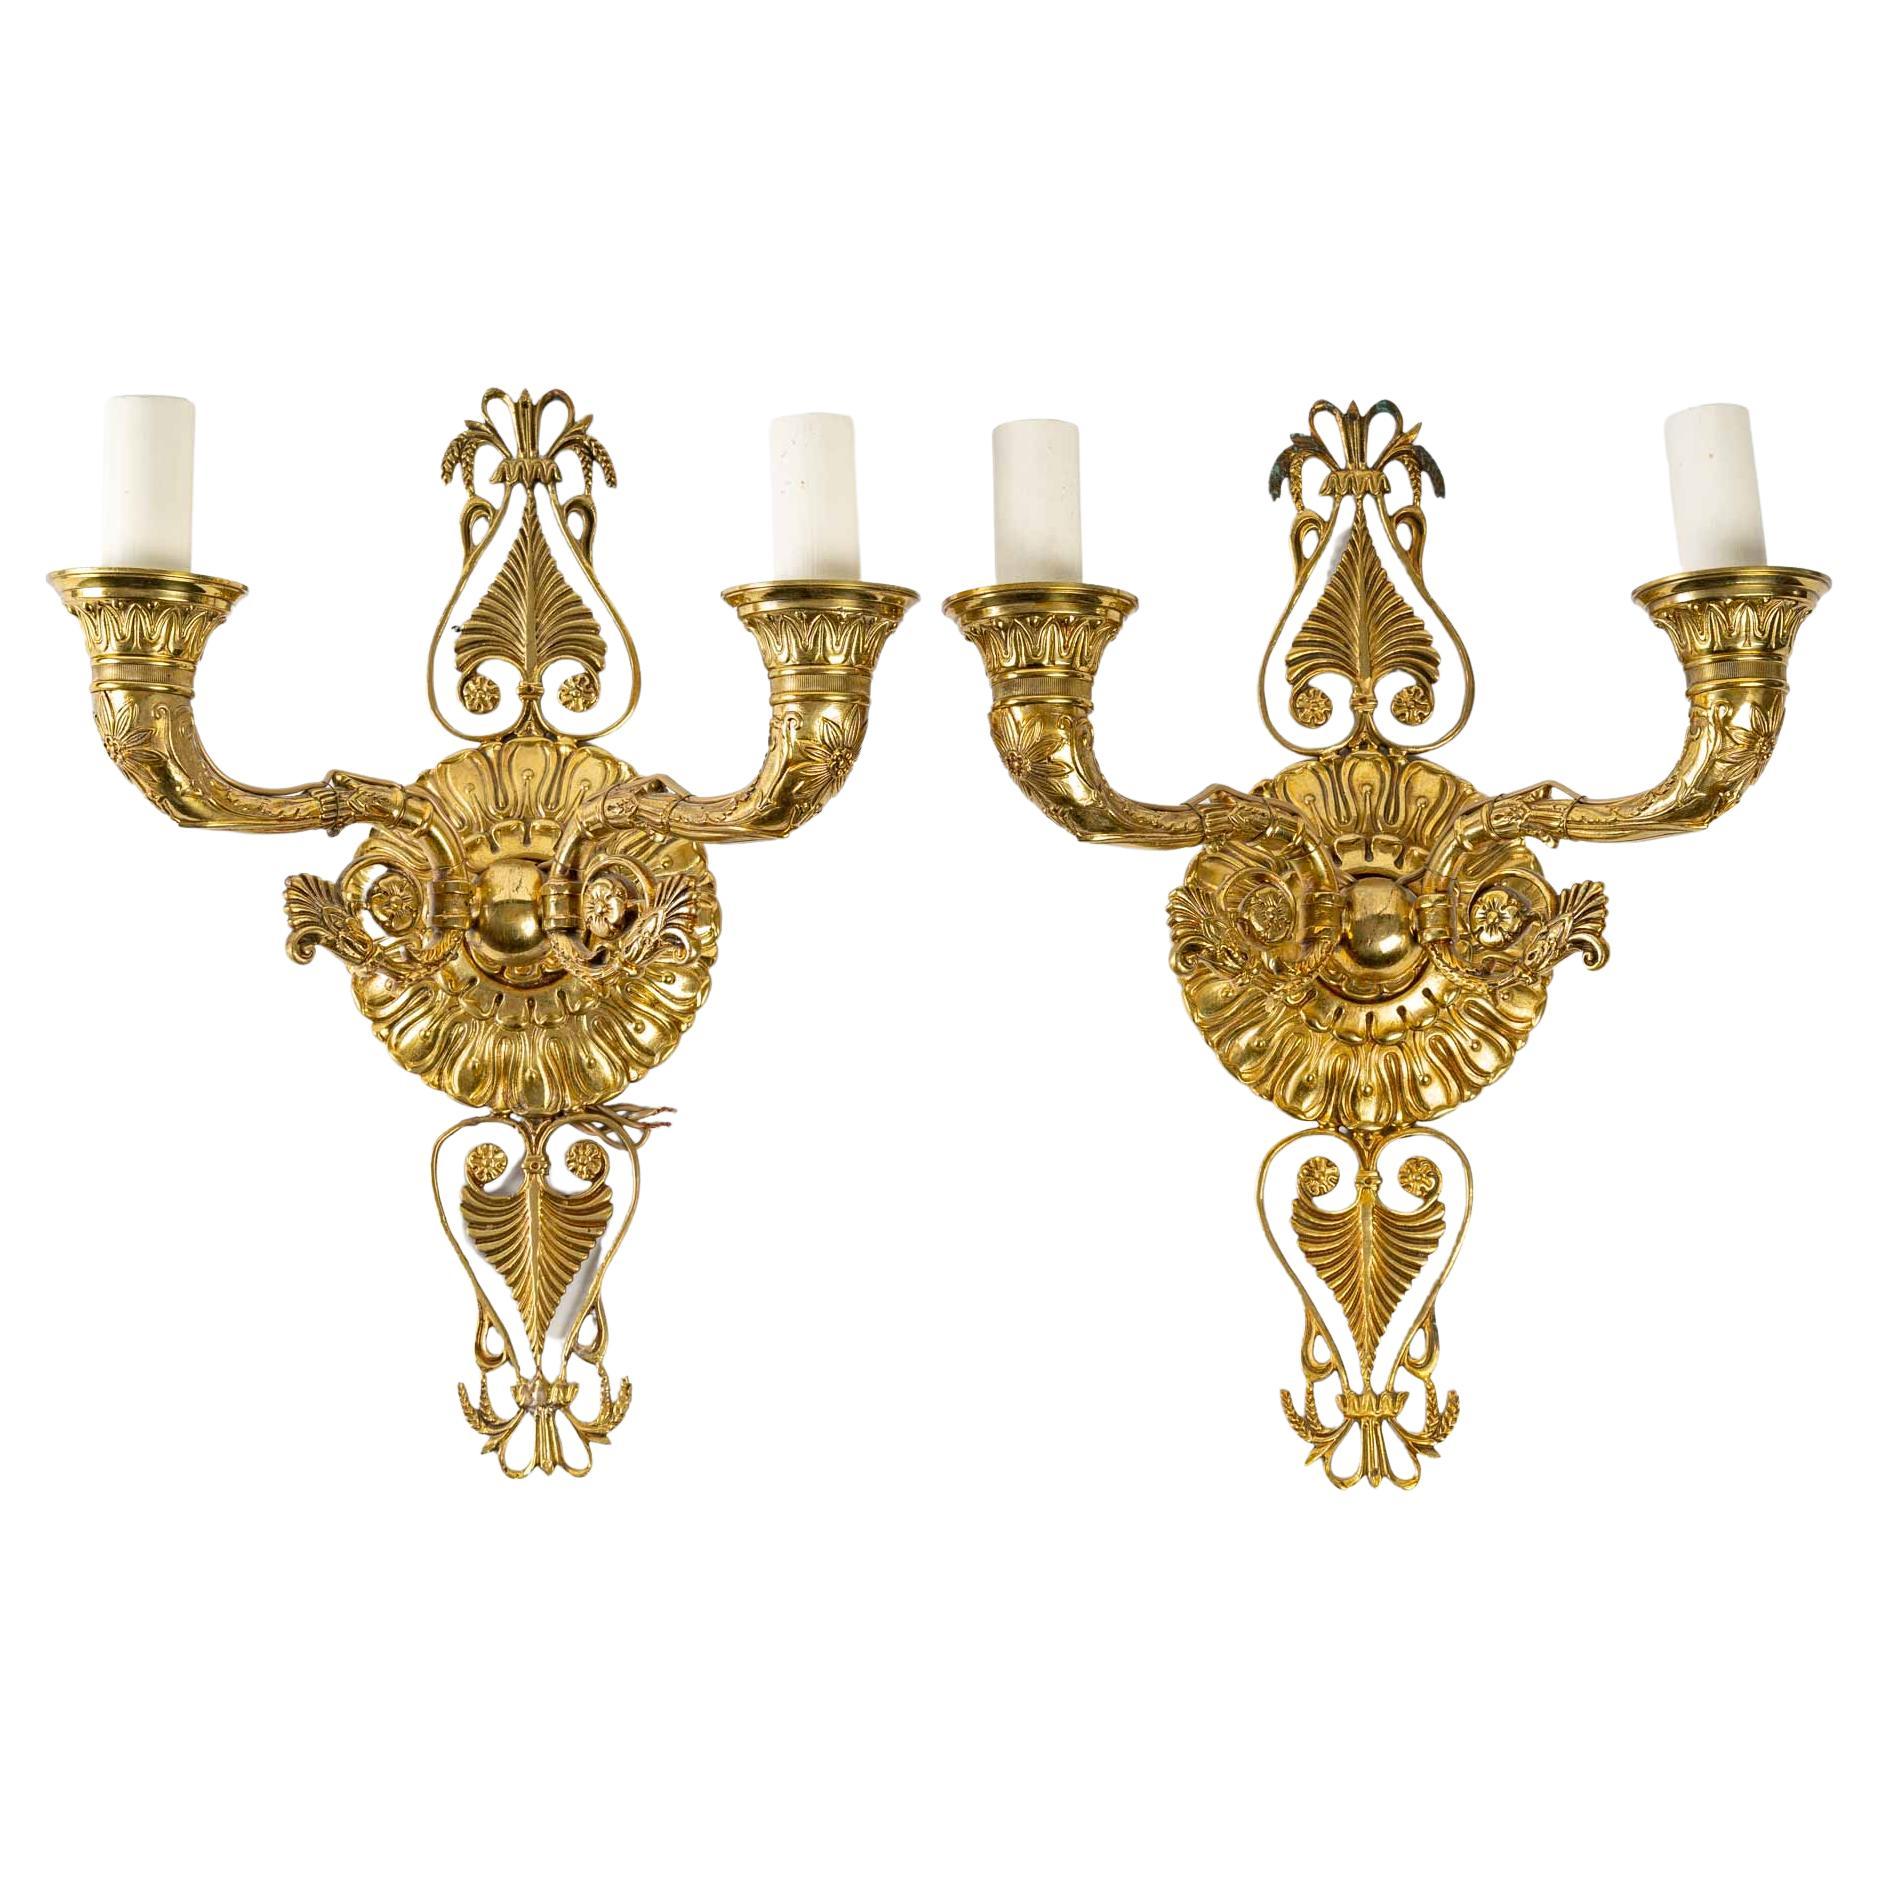 Pair of Restauration Style Wall Lights